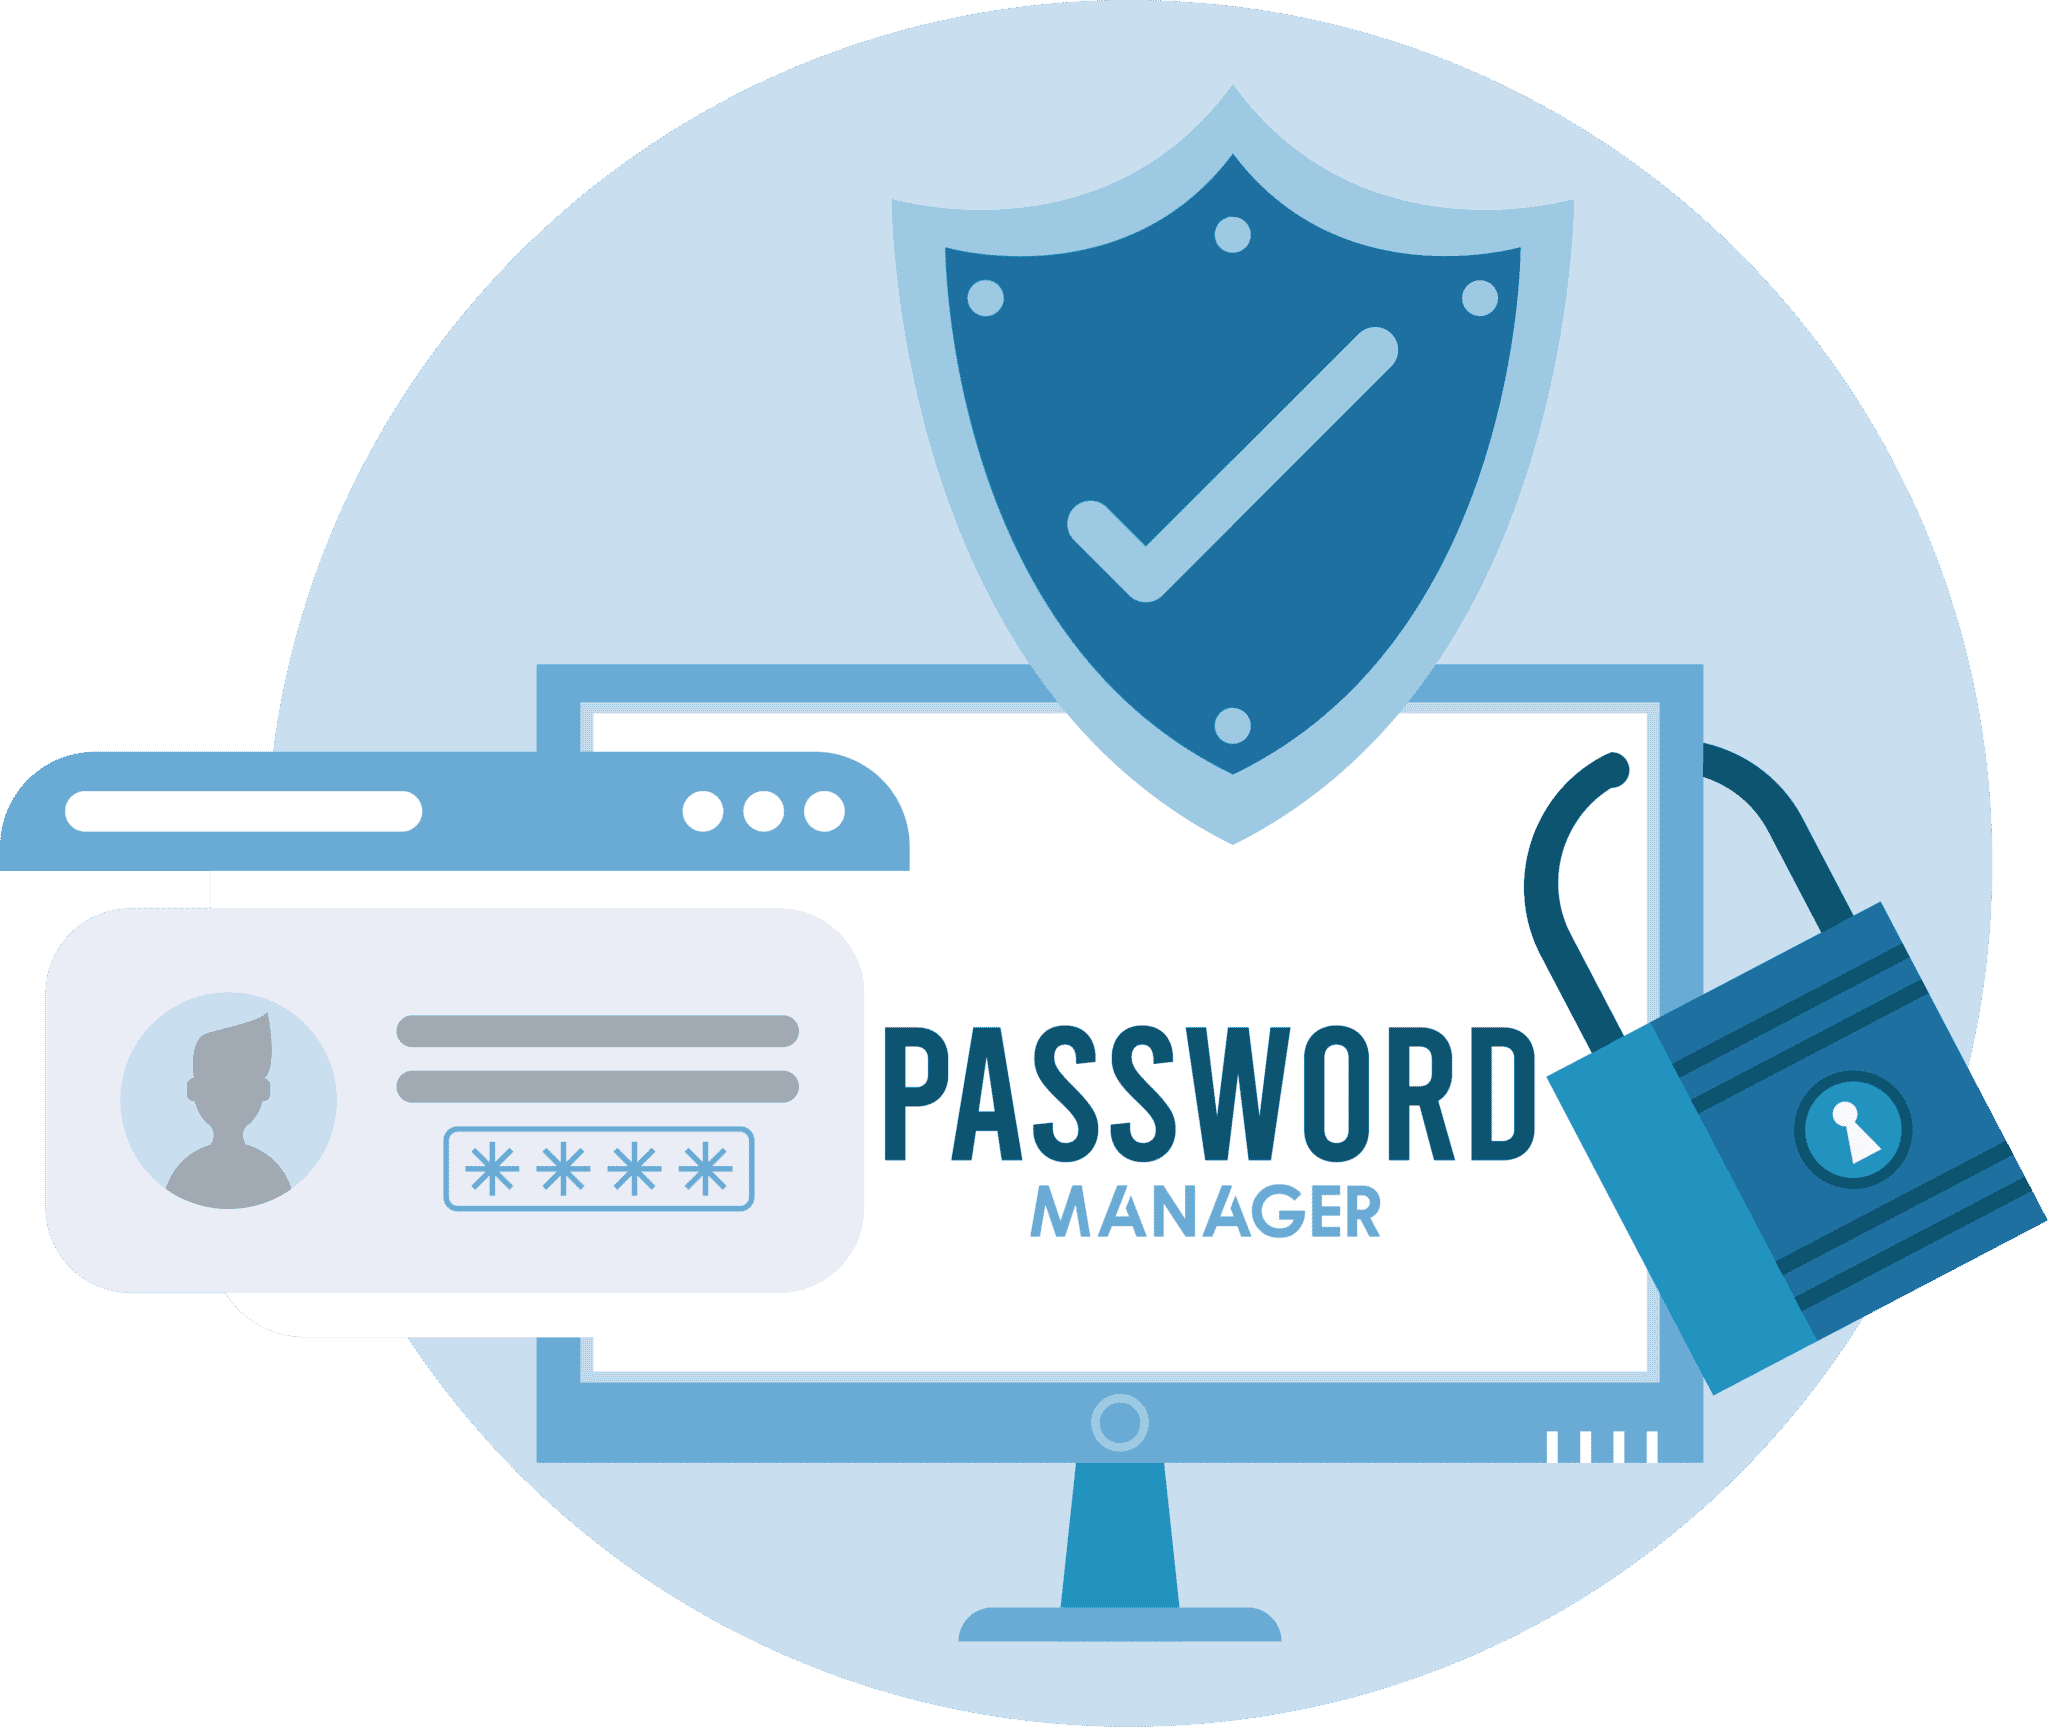 lastpass password manager free trial